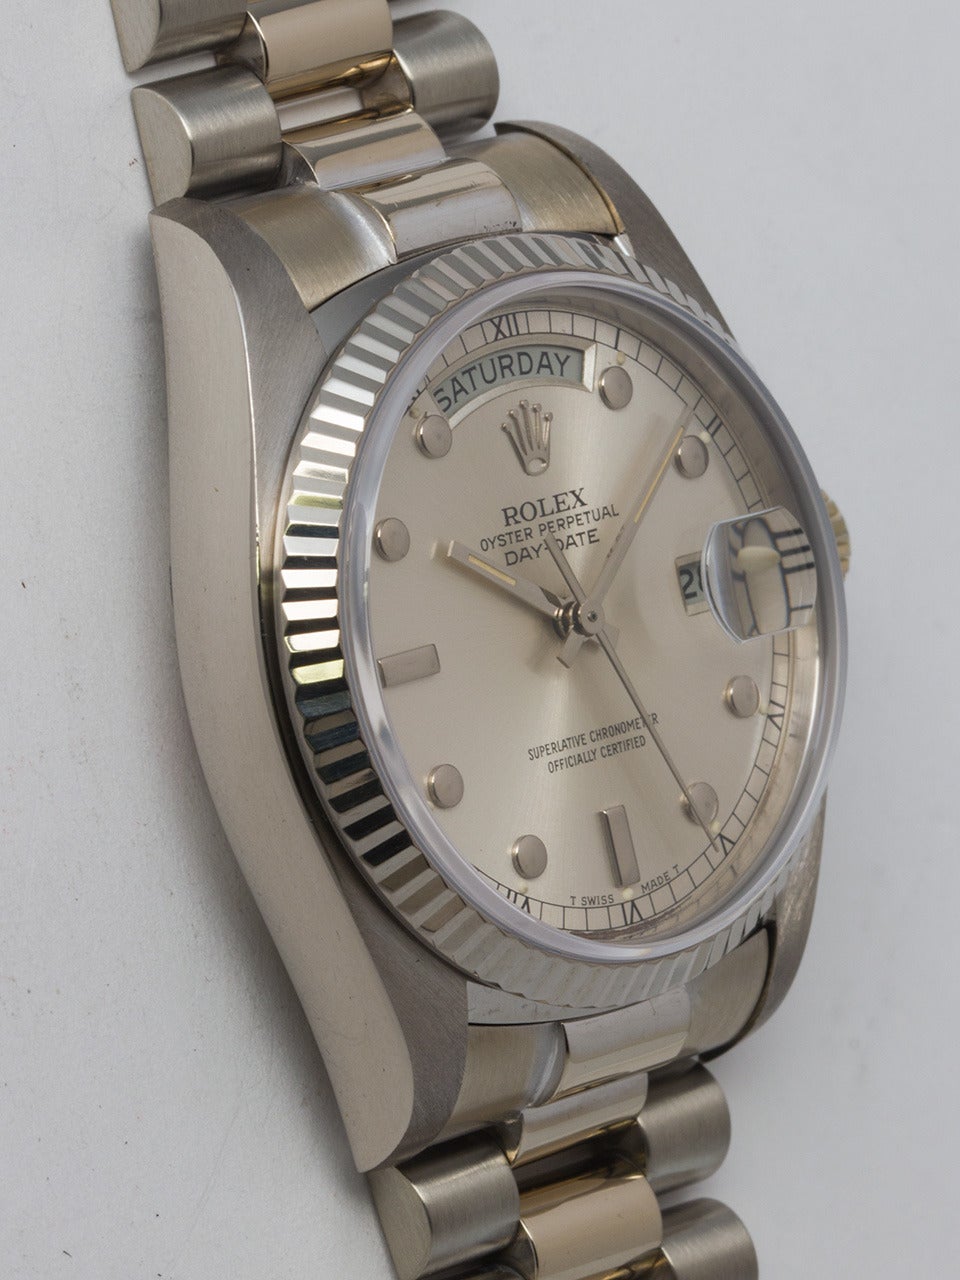 Rolex 18k white gold Day-Date wristwatch, Ref. 18039, serial number 6.2 million, circa 1980. 36mm full-size man's Oyster case with 18k white gold fluted bezel and sapphire crystal. Scarce original silvered dial with distinctive applied indexes and